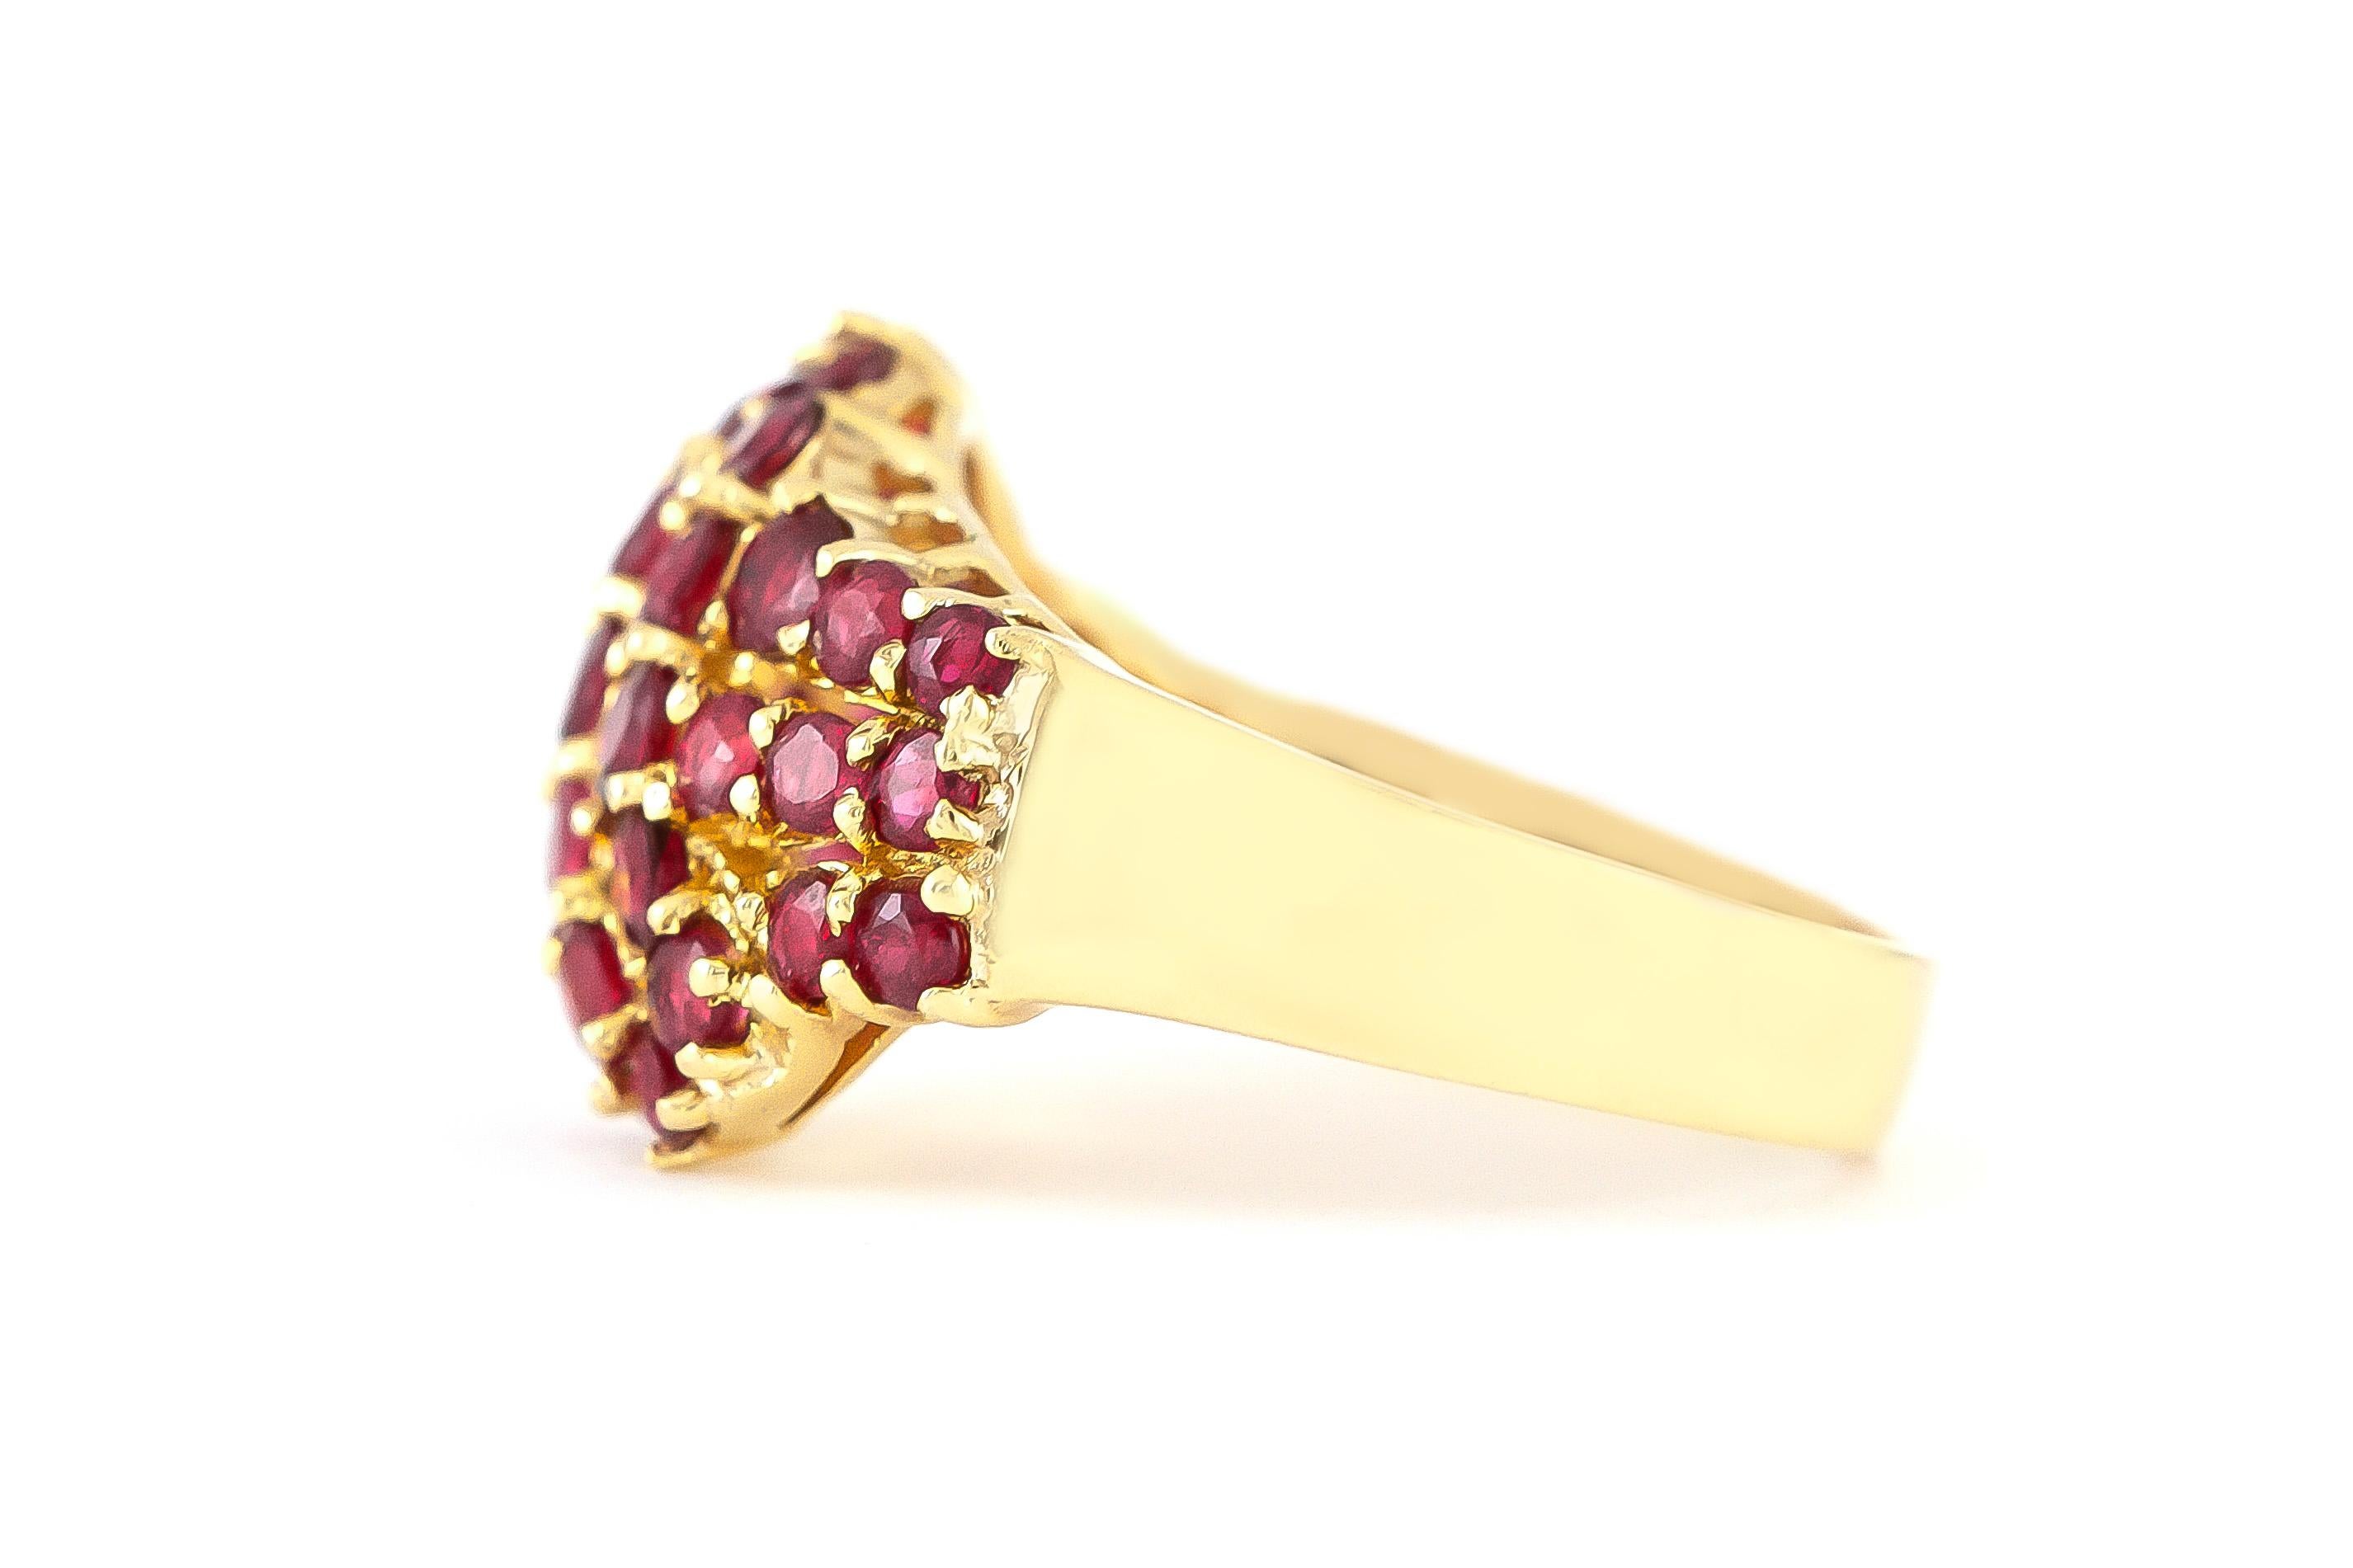 Finely crafted in 14k yellow gold with rubies on the center weighing approximately a total of 3.20 carats.
Circa 1980.
Size 7 1/4, resizable